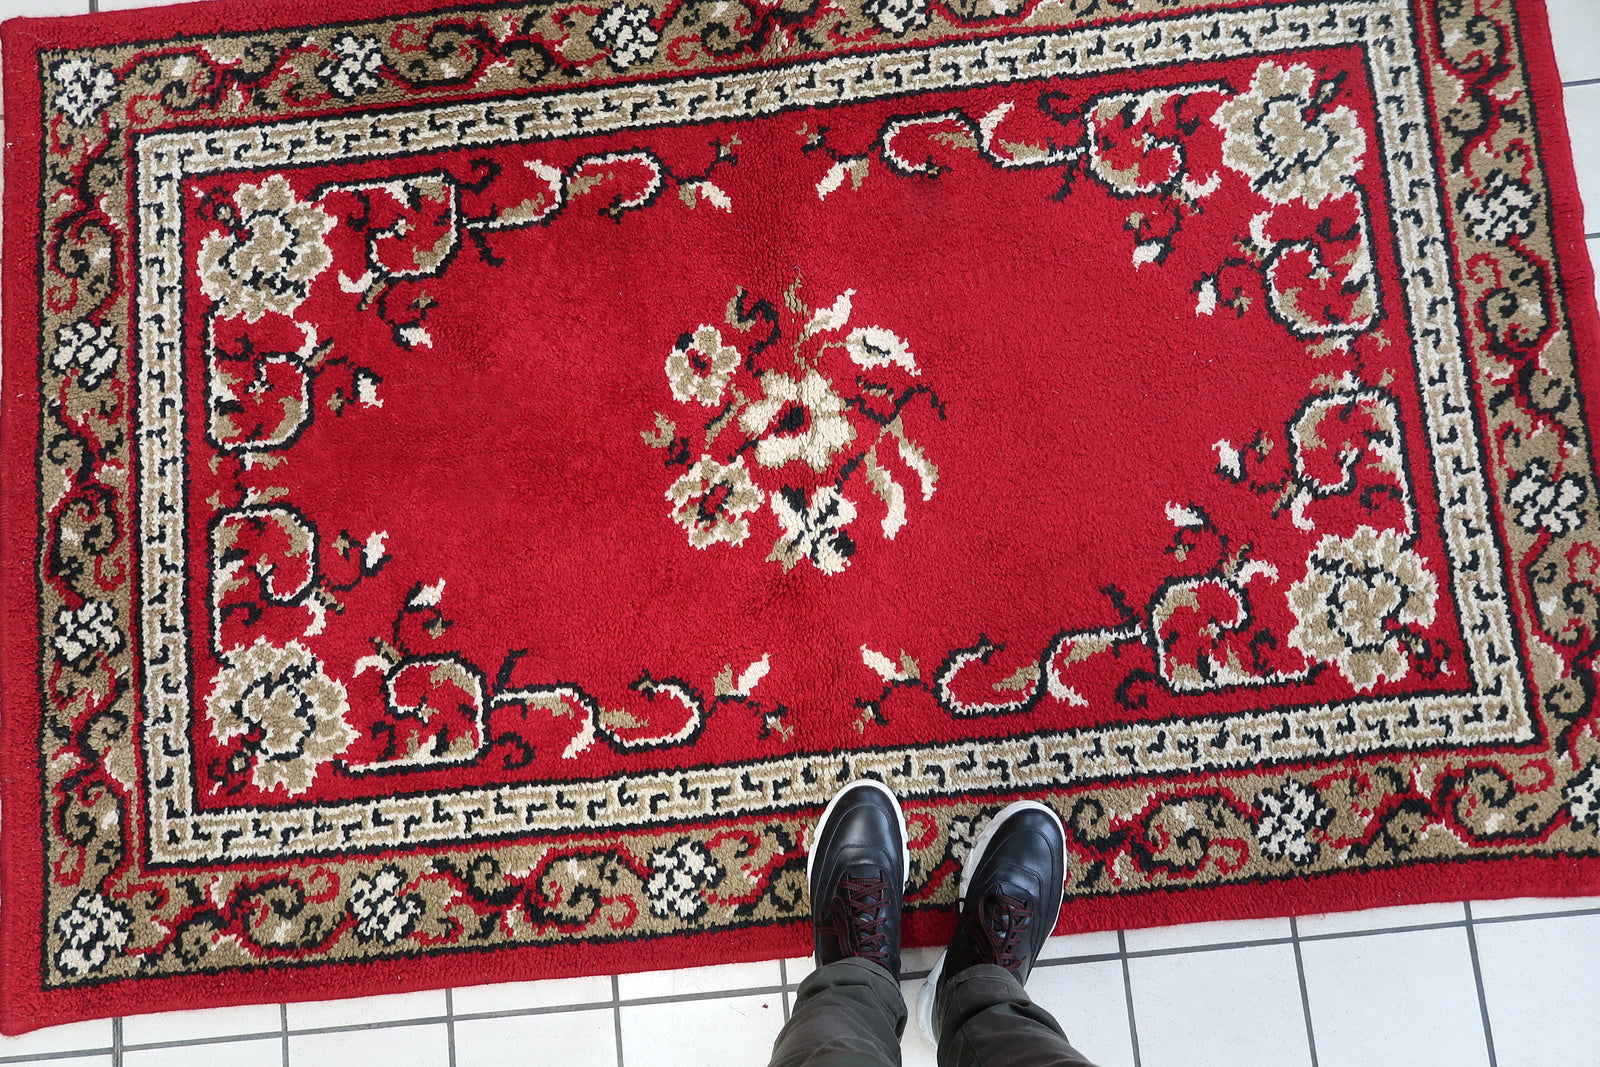 Vintage French Savonnerie woolen rug in bright red color and floral design. The rug is from the end of 20th century in original good condition.